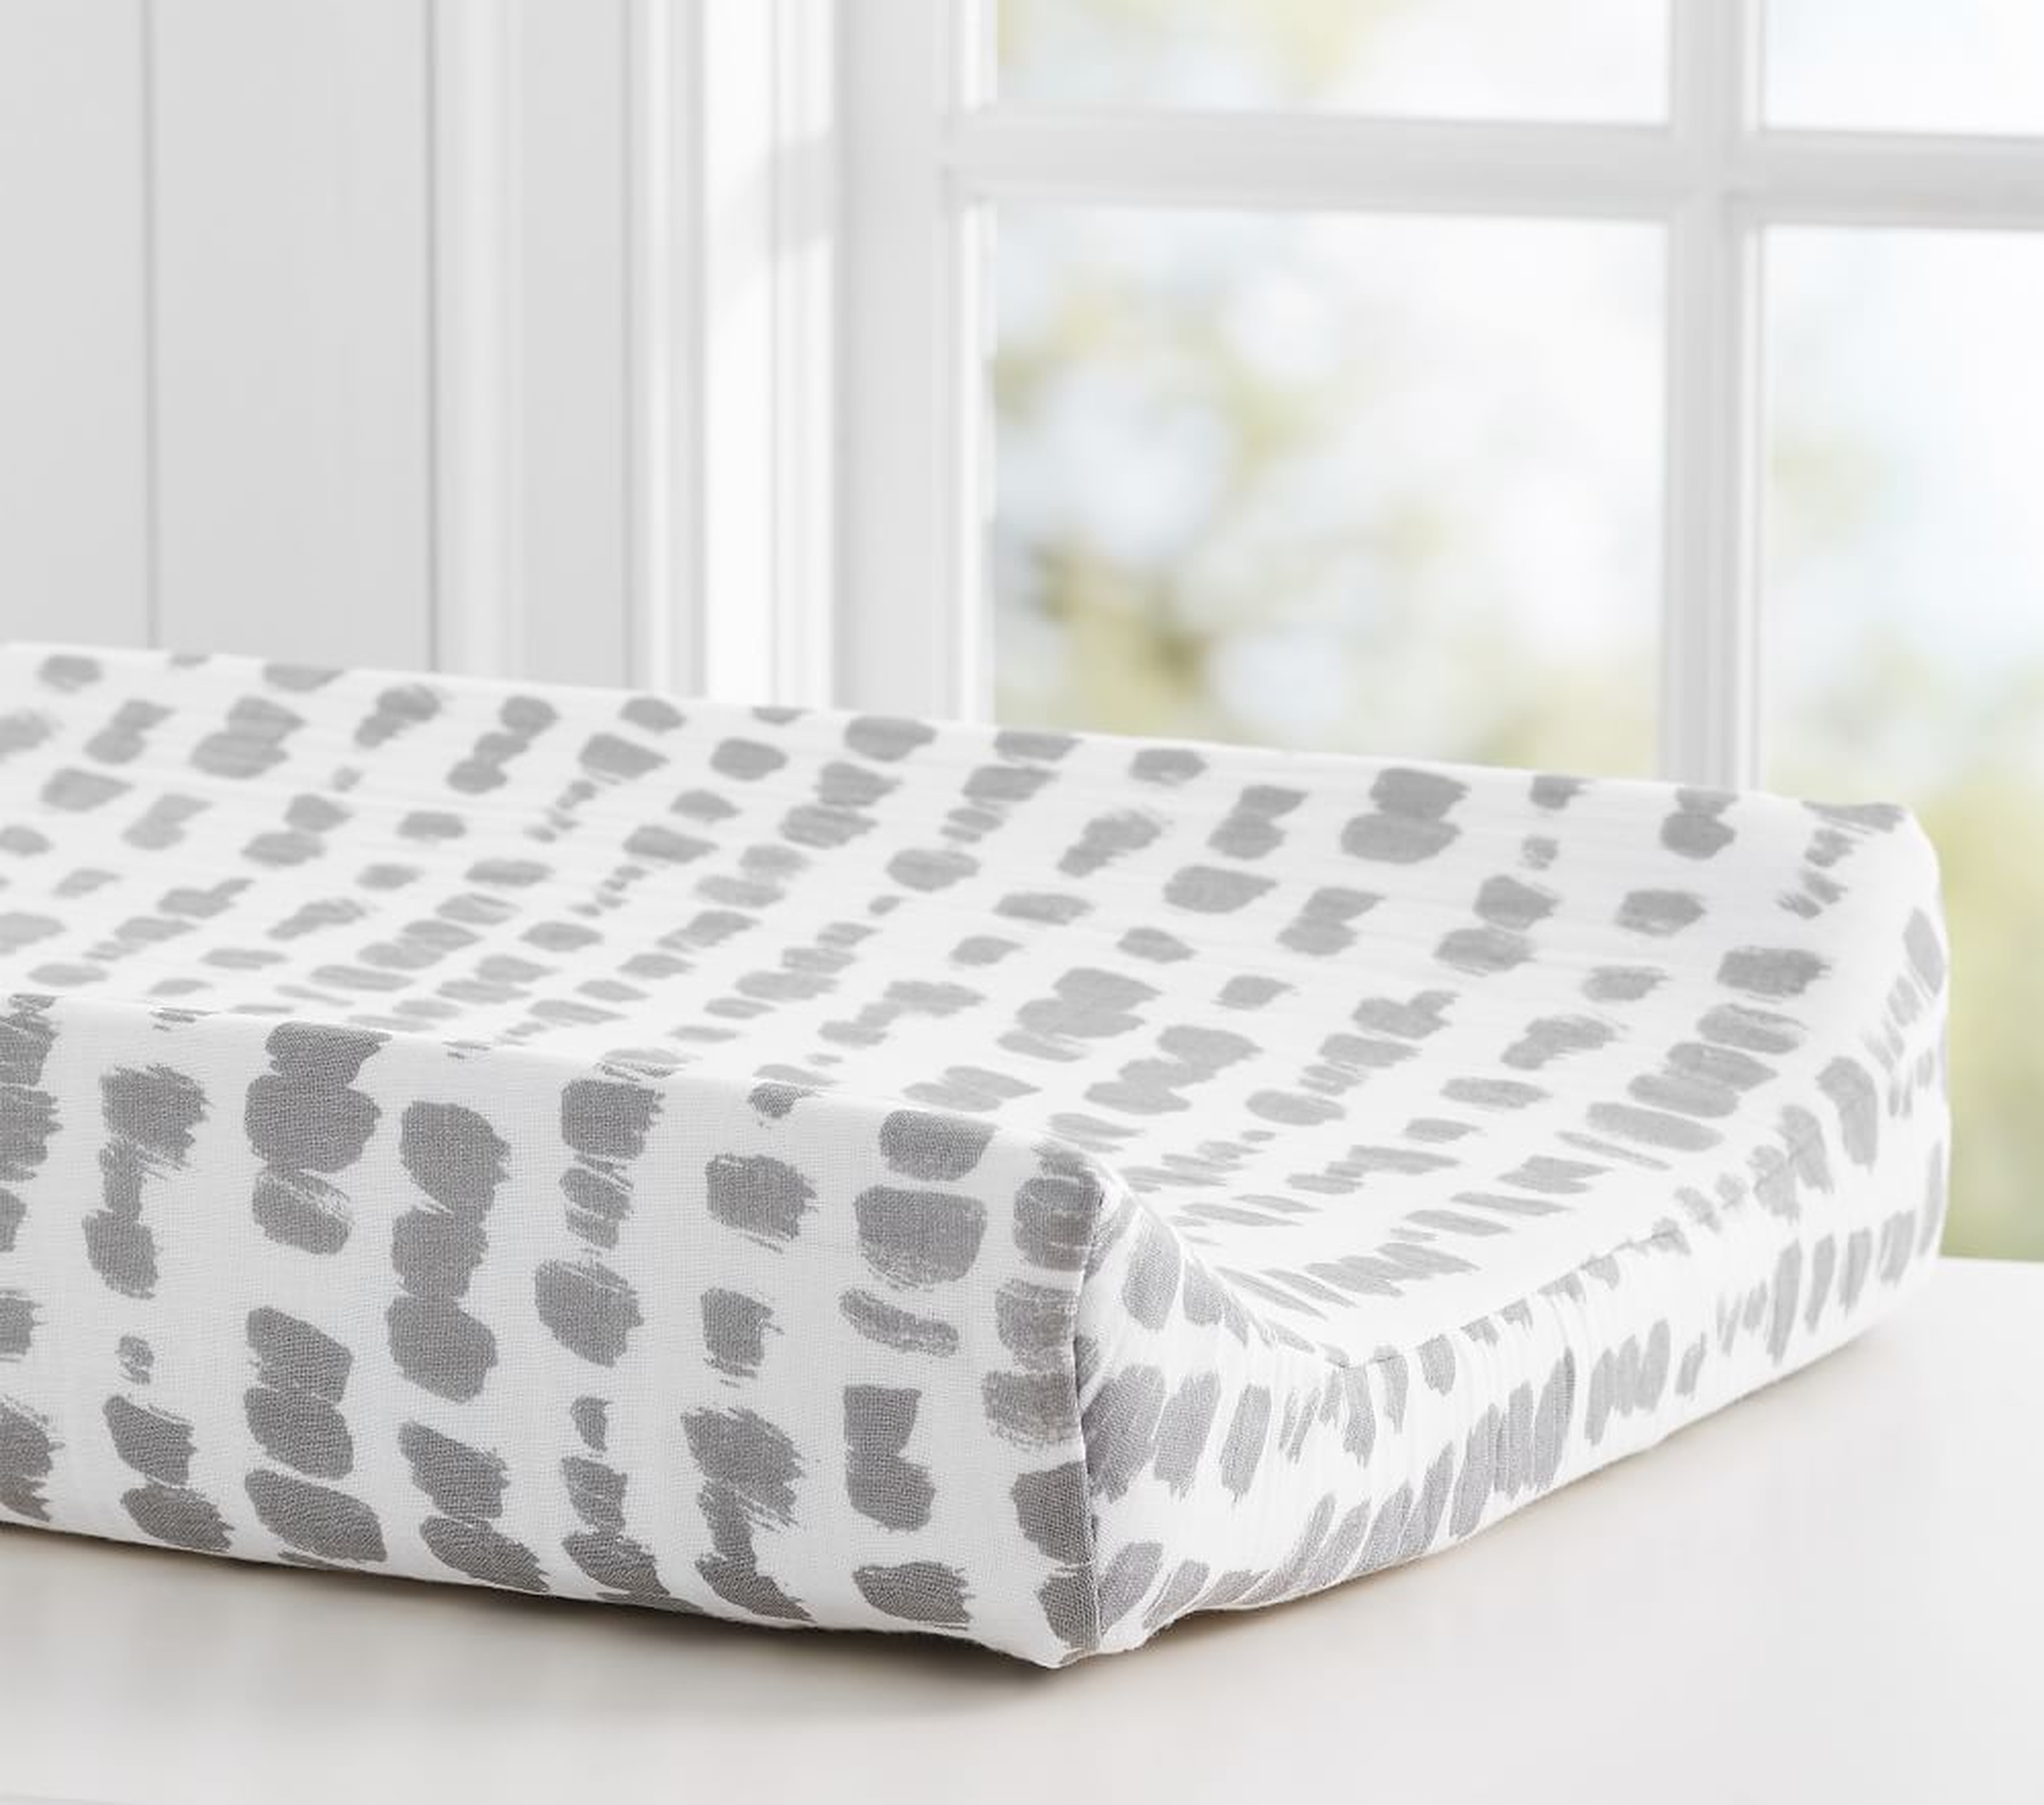 Brushstroke Dot Changing Pad Cover, Gray, WE Kids - West Elm